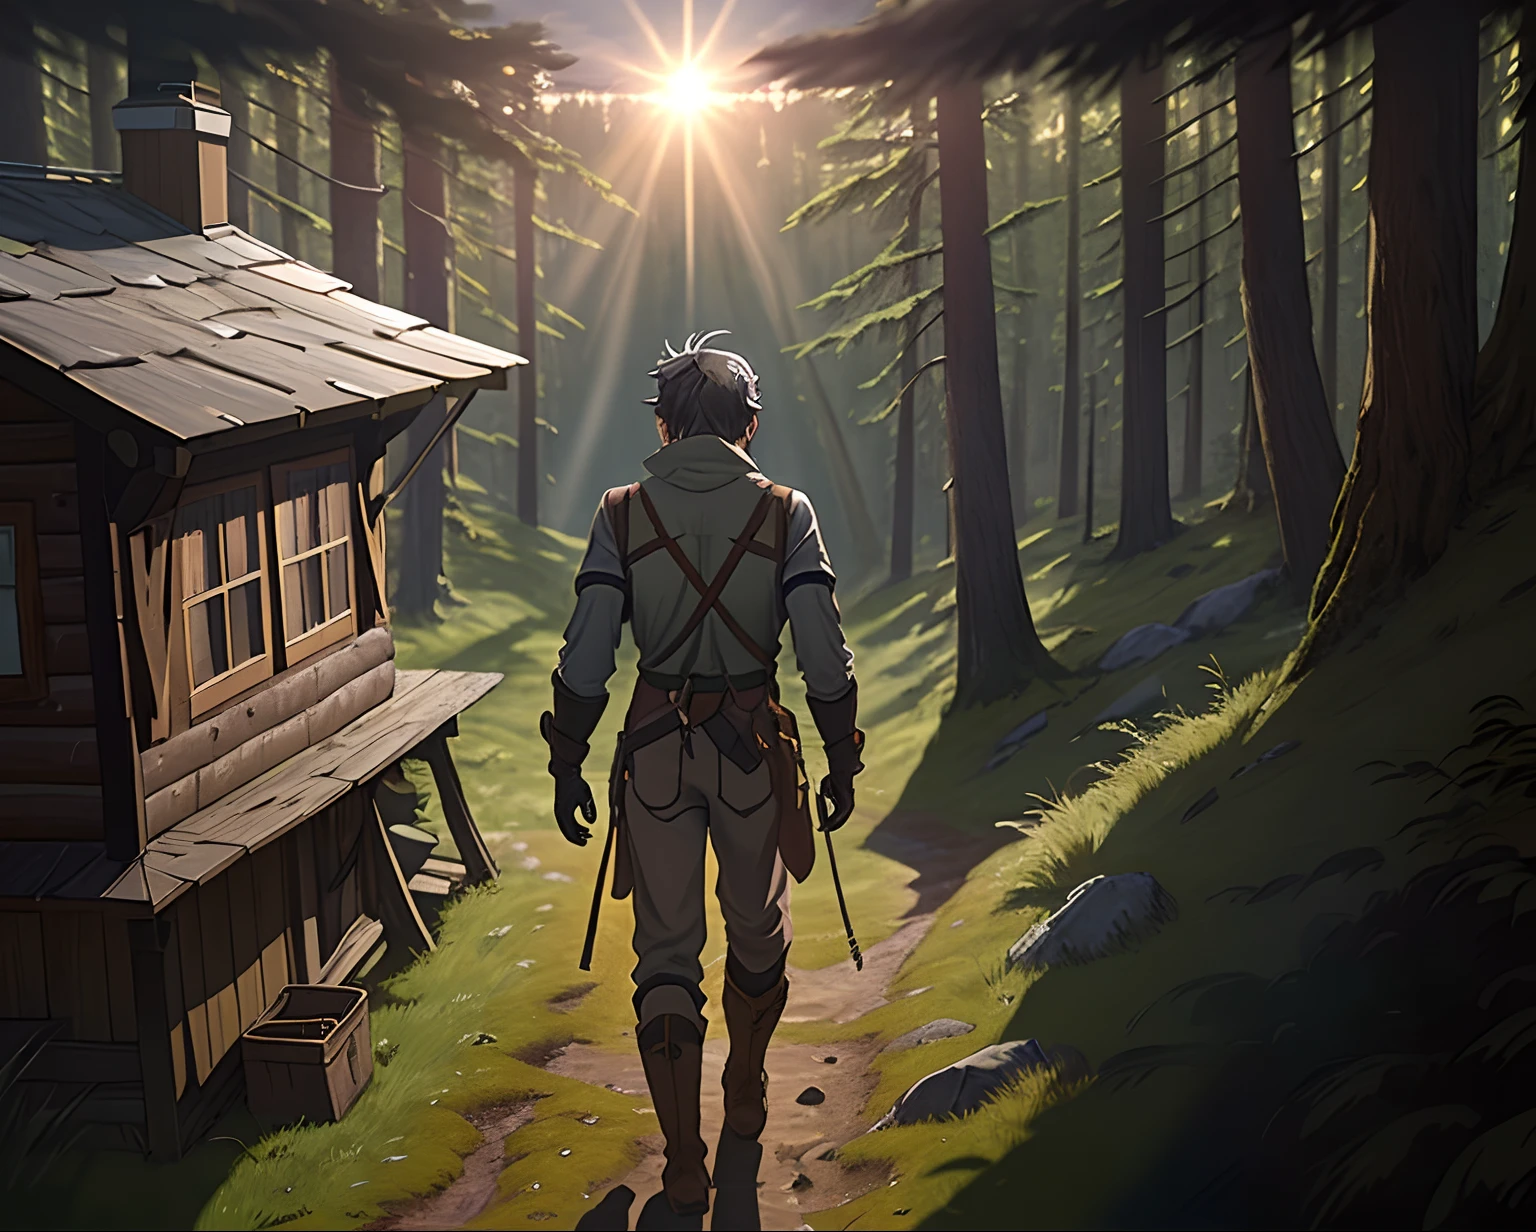 As the first rays of sunlight peek over the horizon, young man black and gray hair his gae around 17 years old, an experienced hiker, emerges from his rustic cabin located at the edge of the forest. His boots crunched on the dew-stained grass with adventurer chlote and lock belt that contain equipment , anime style fantasy forest adventure